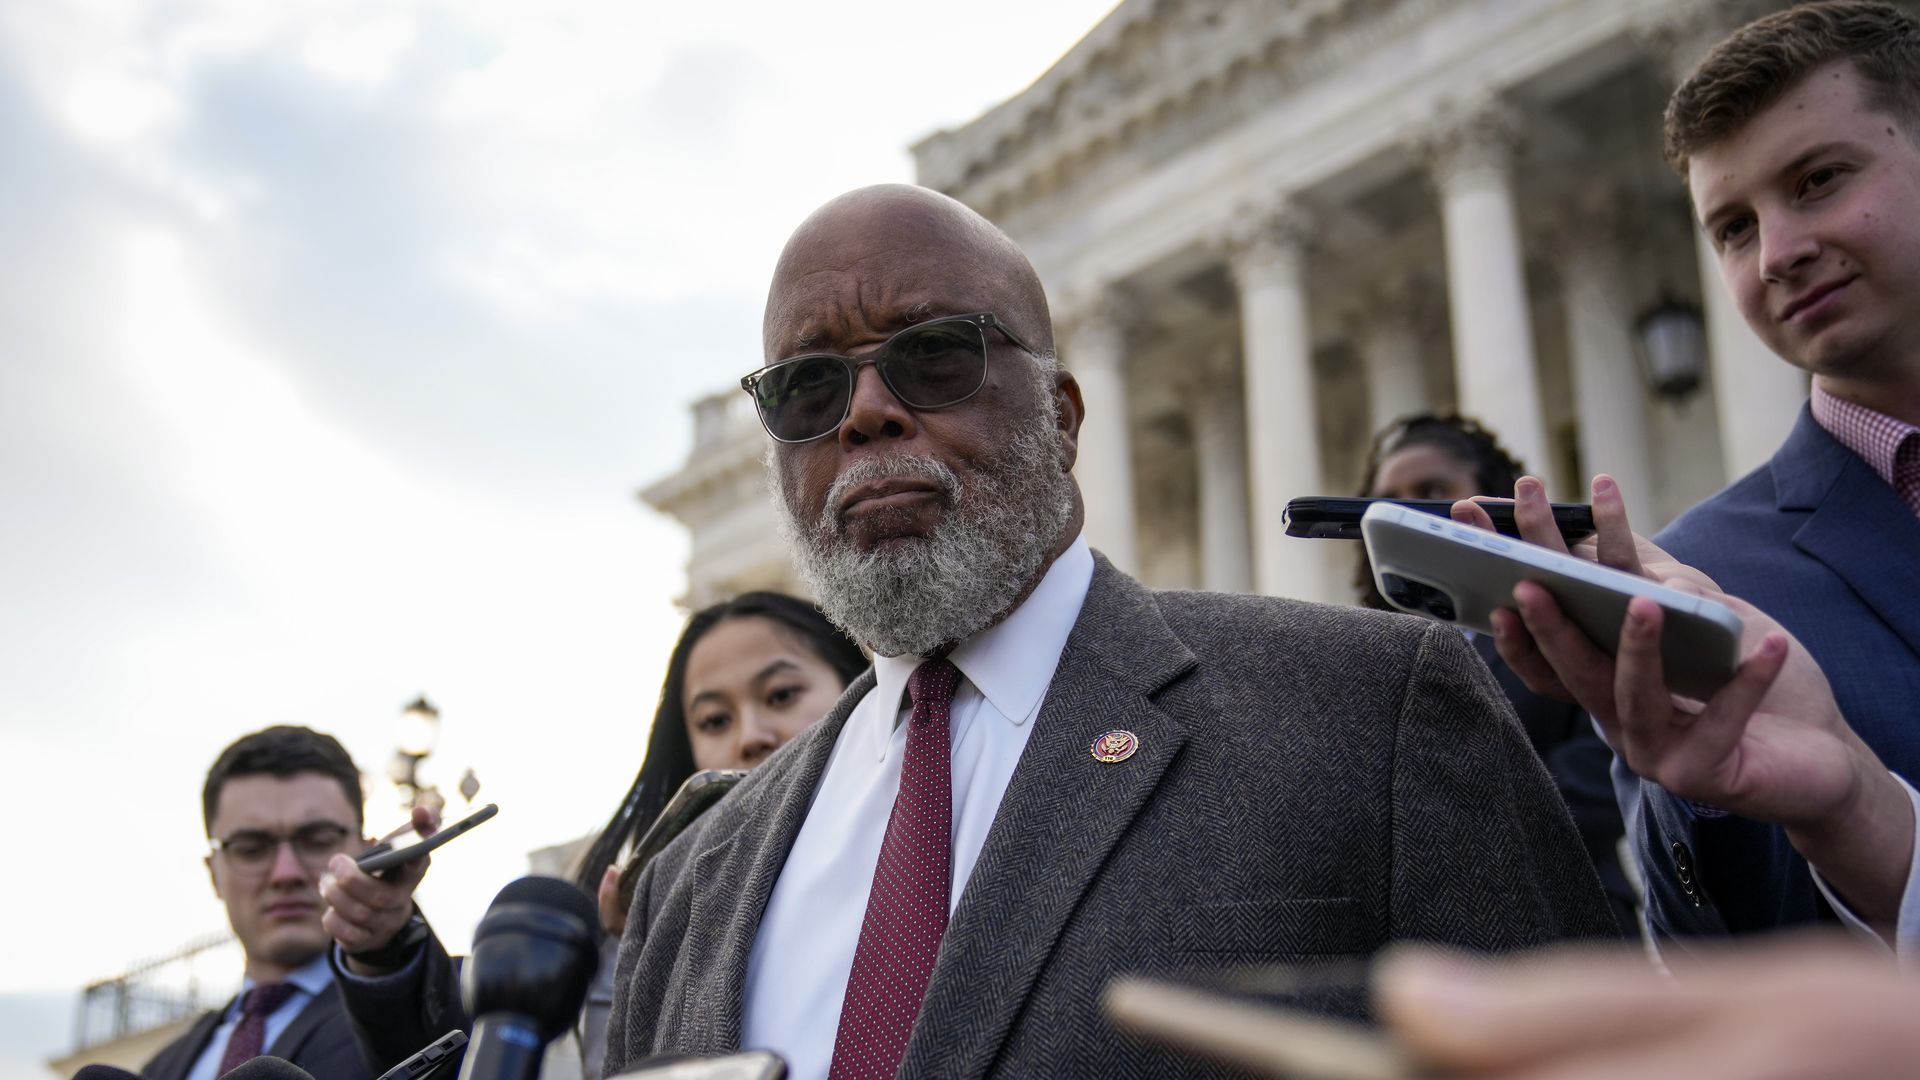 Rep. Bennie Thompson (D-Miss.), the chair of the Jan. 6 committee wearing a grey suit, light blue shirt and red tie, speaks to reporters on the Capitol steps.